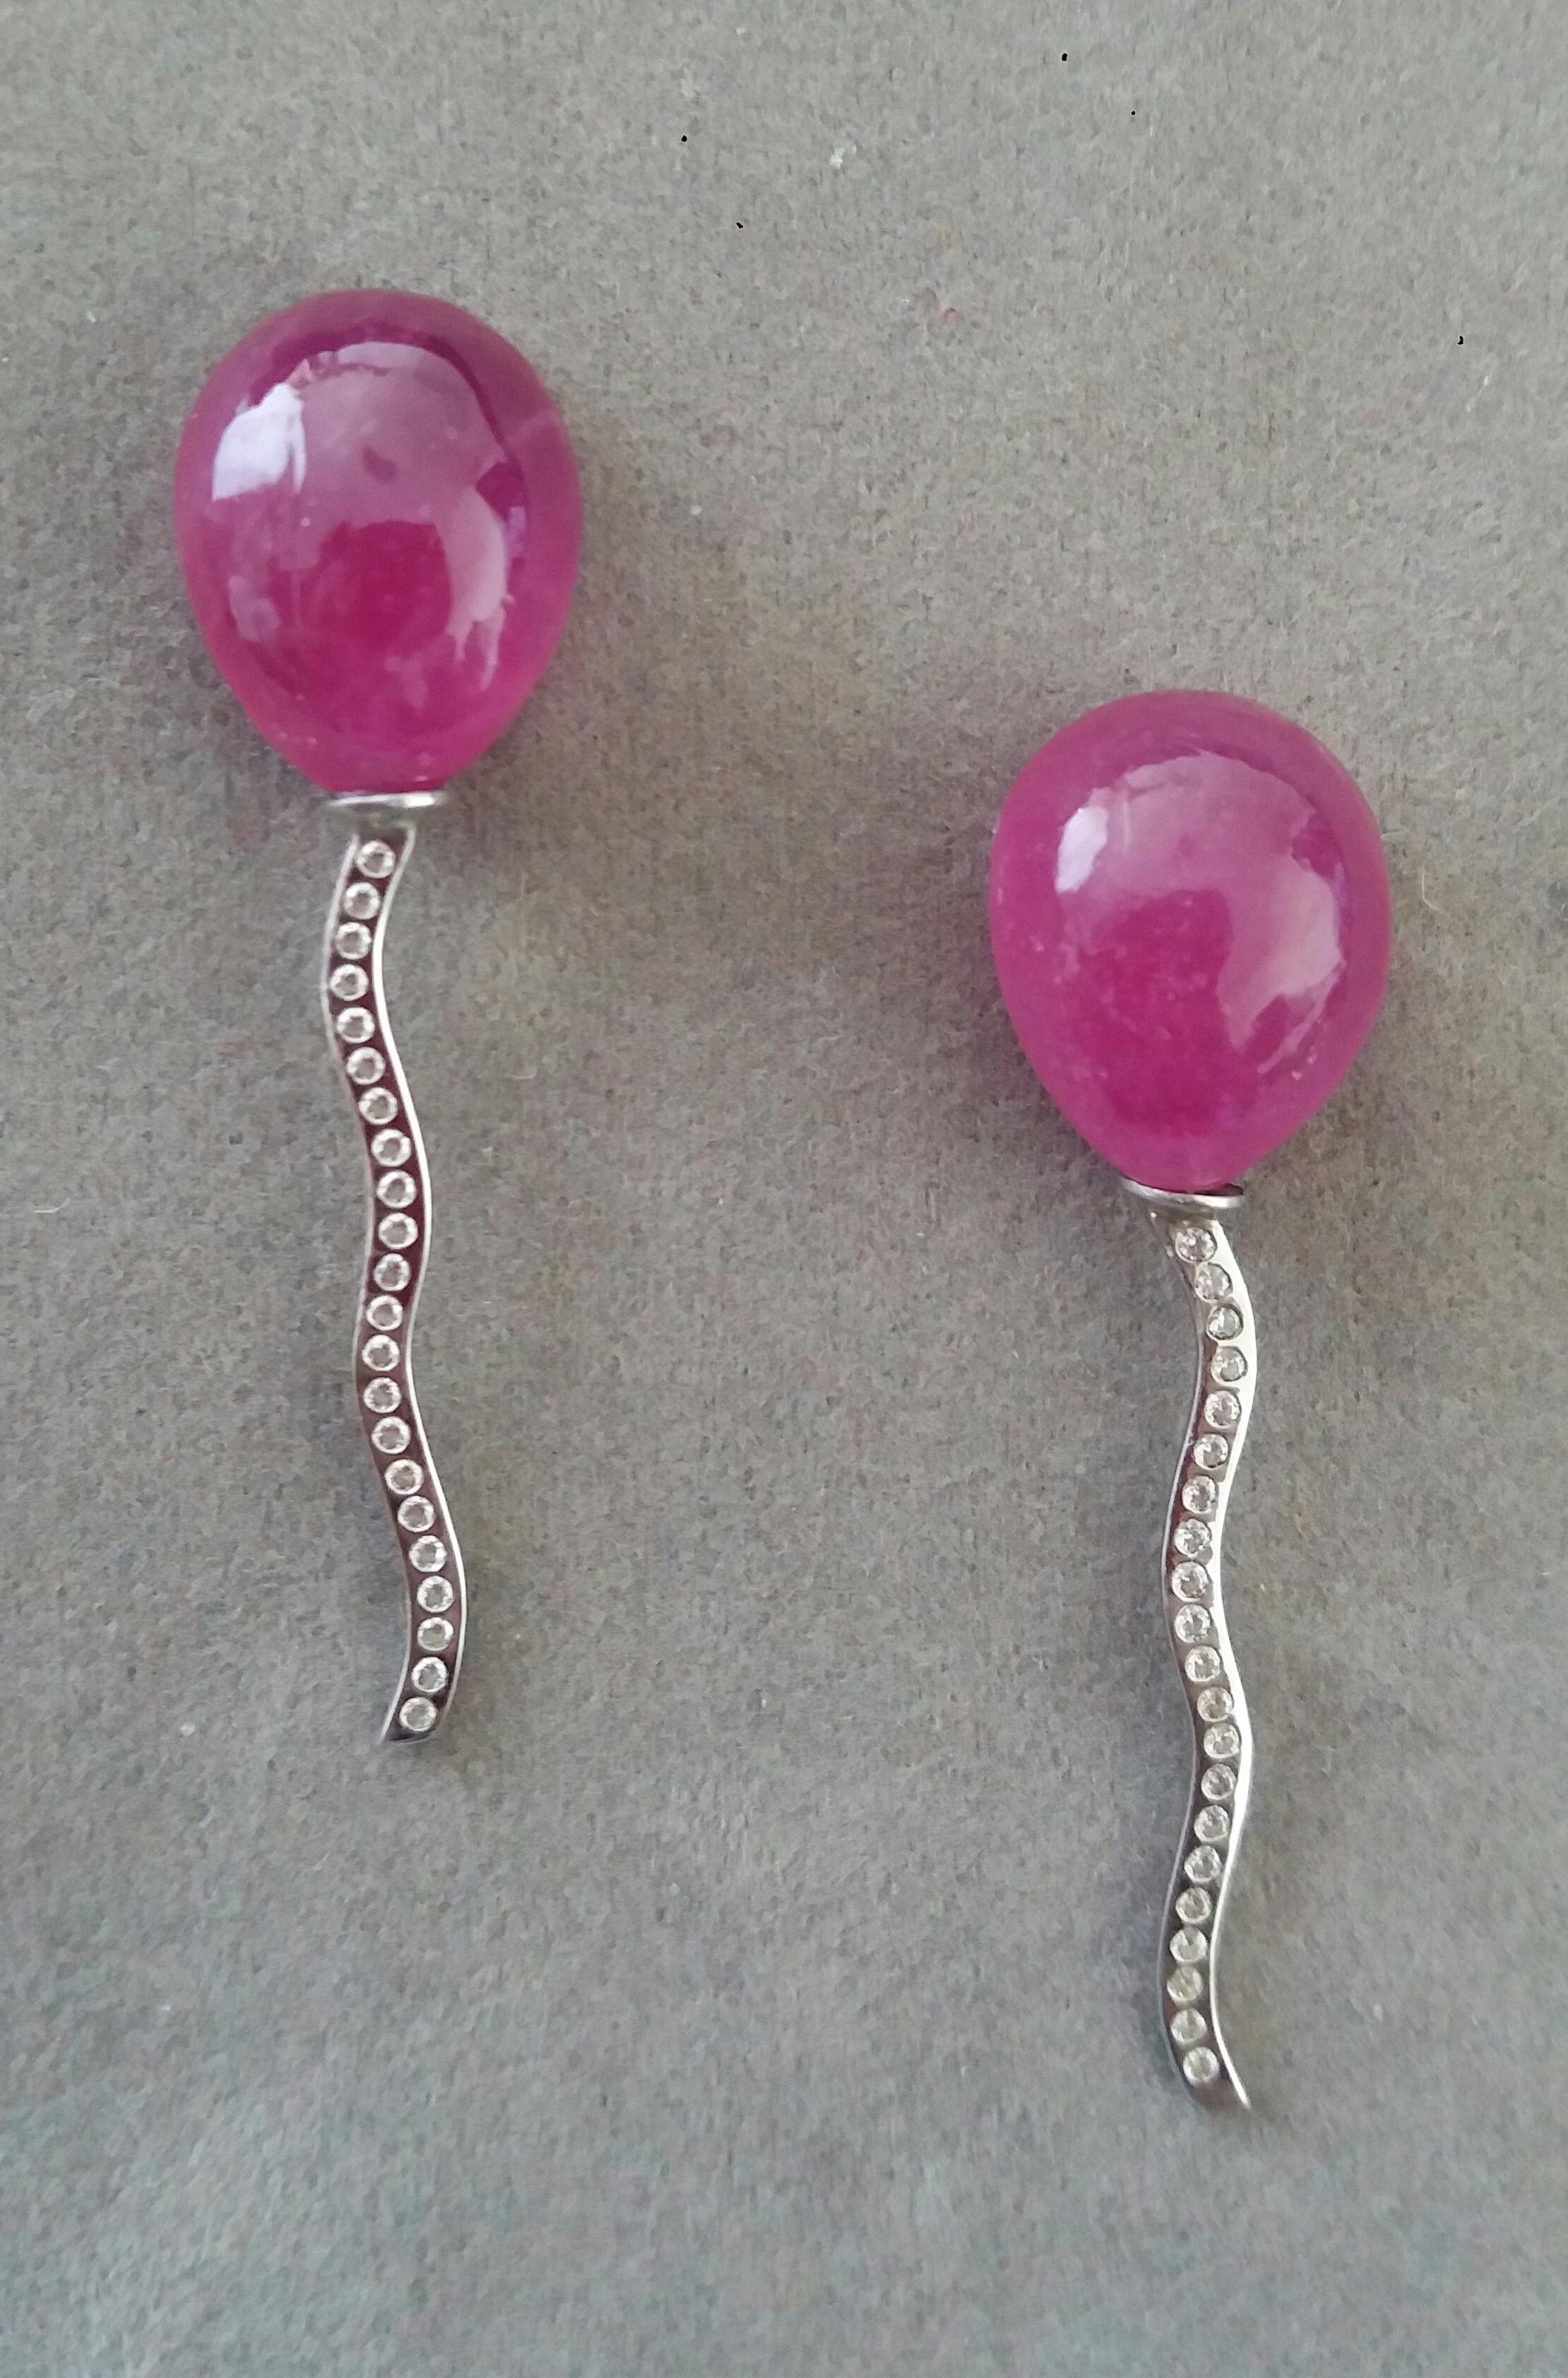 2 pear-shaped Natural Ruby pear shape cabs measuring 12x16 mm. mounted like balloons with the thread holding them made of 14 carat White Gold and 44 small diamonds.

In 1978 our workshop started in Italy to make simple-chic Art Deco style jewellery,